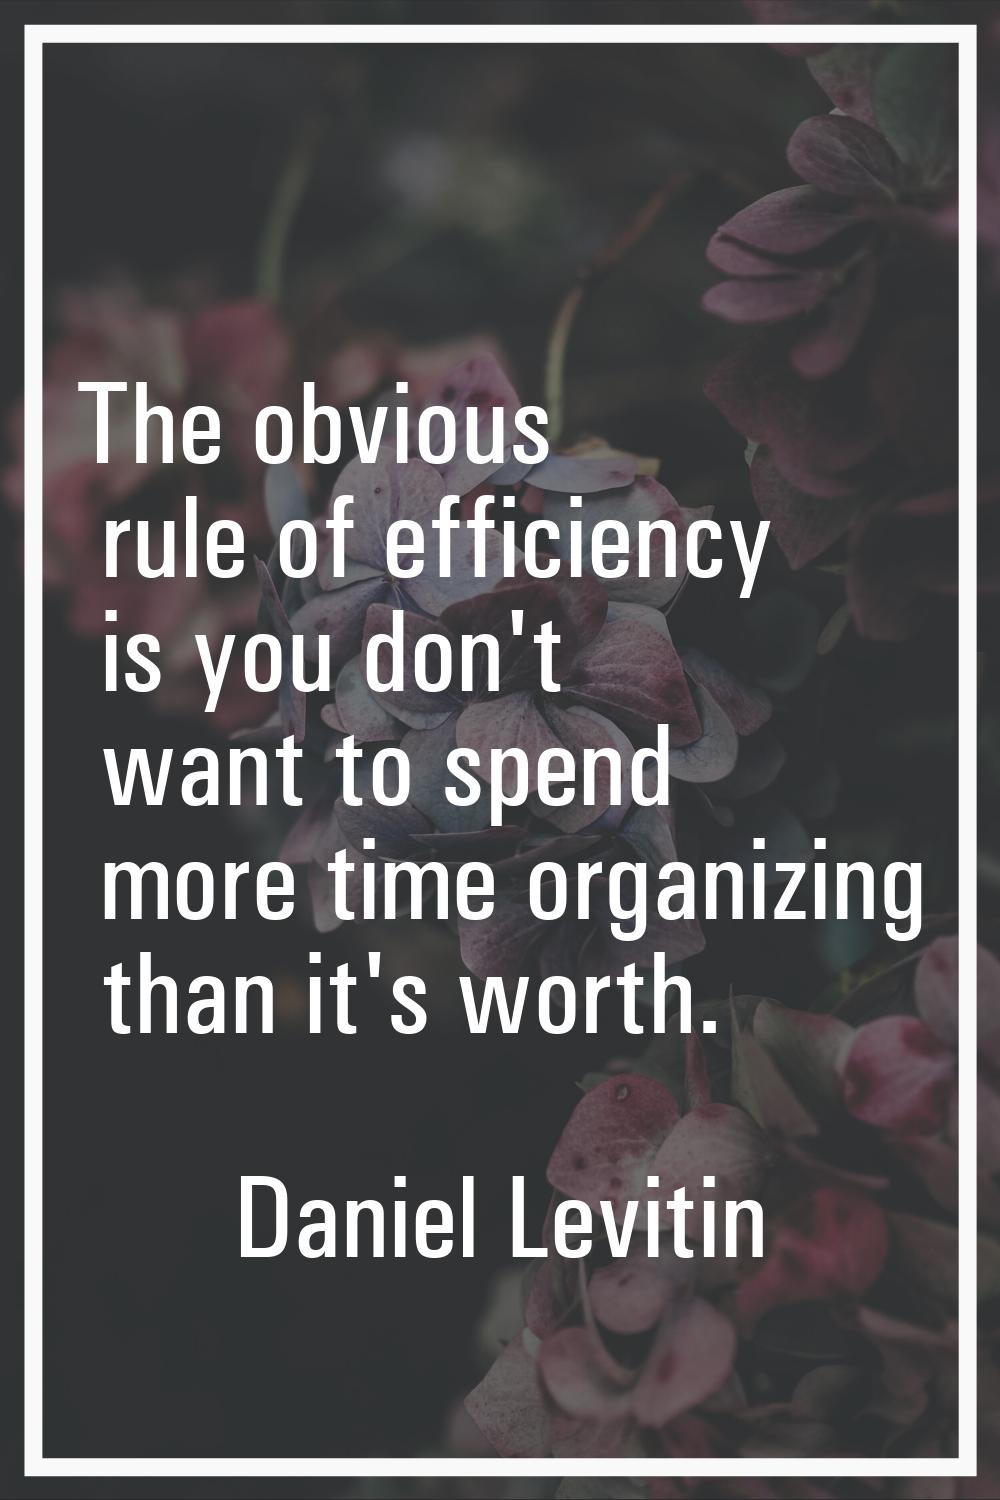 The obvious rule of efficiency is you don't want to spend more time organizing than it's worth.